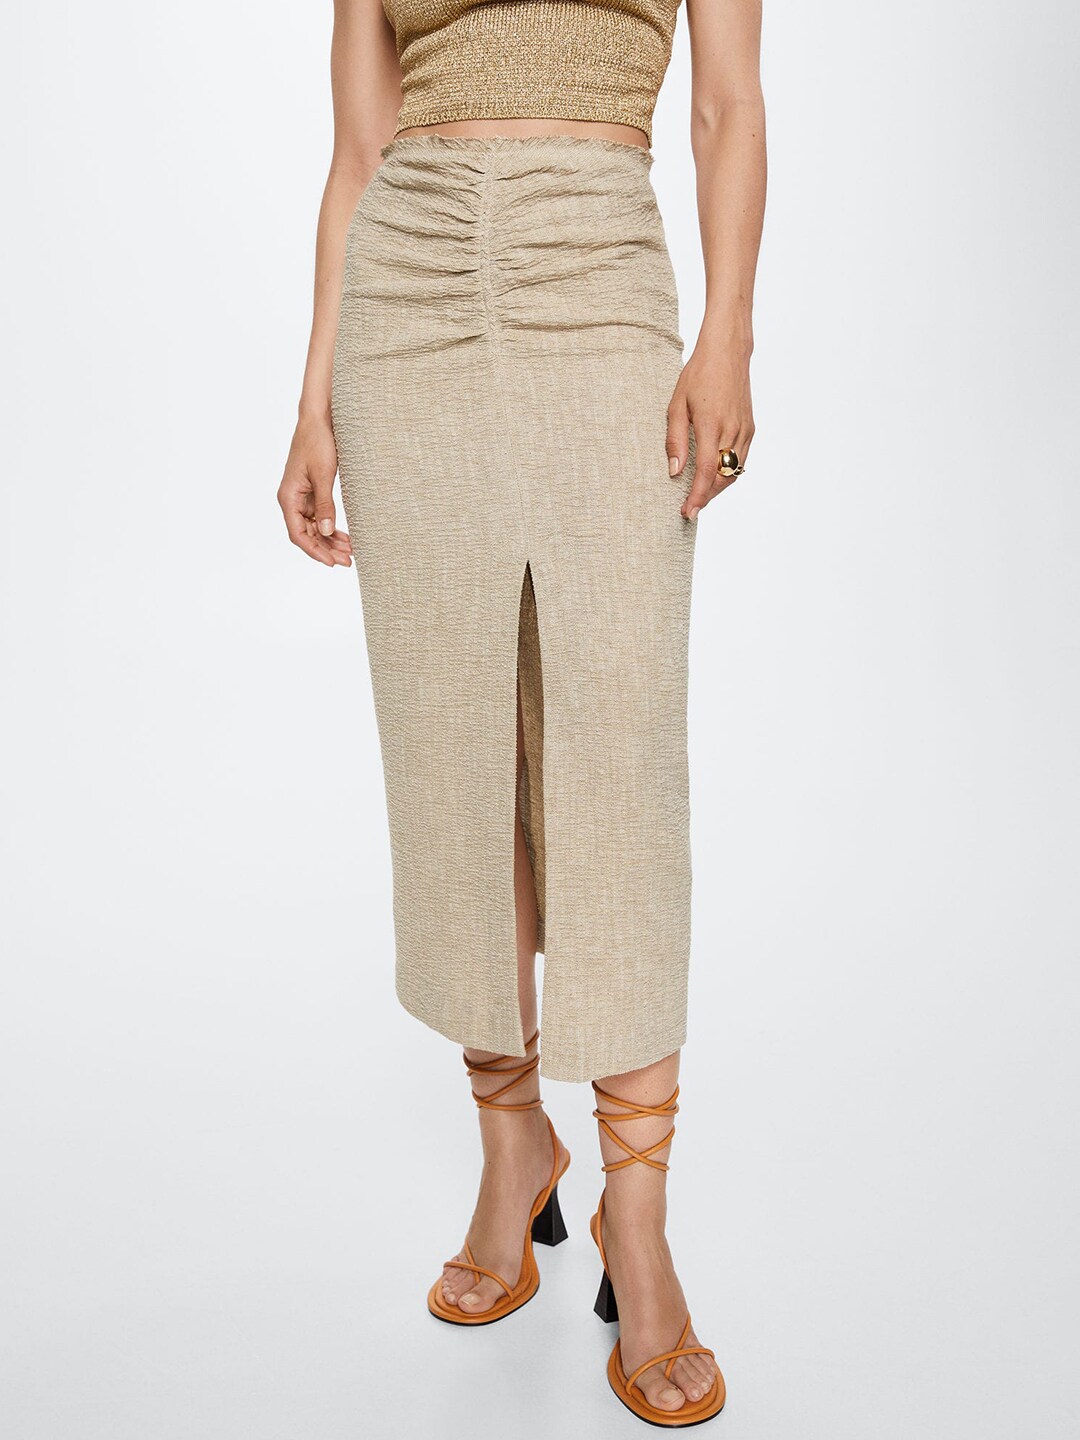 MANGO Women Beige Solid Textured Linen Pleated Front Slit Detail A-Line Skirt Price in India